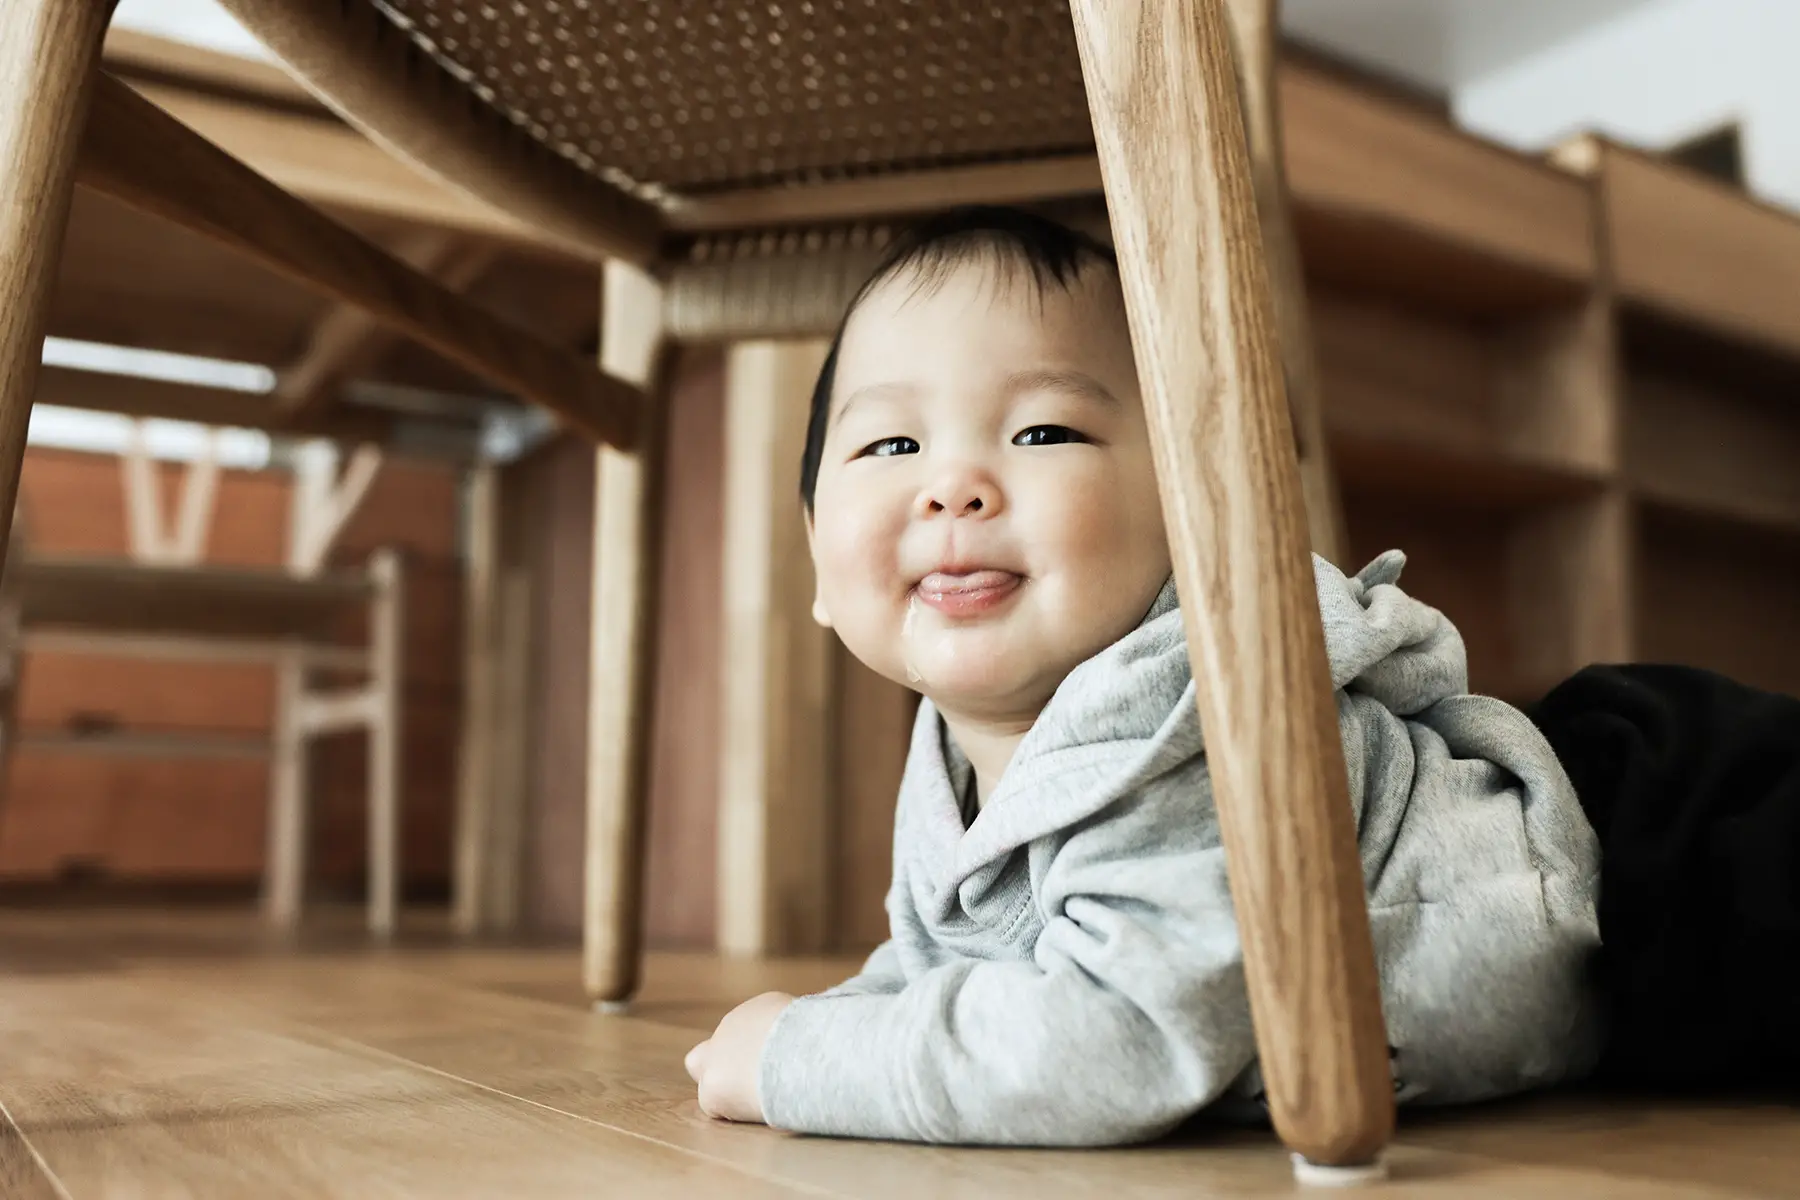 Cheeky little baby on their tummy underneath a table or chair - looking at camera